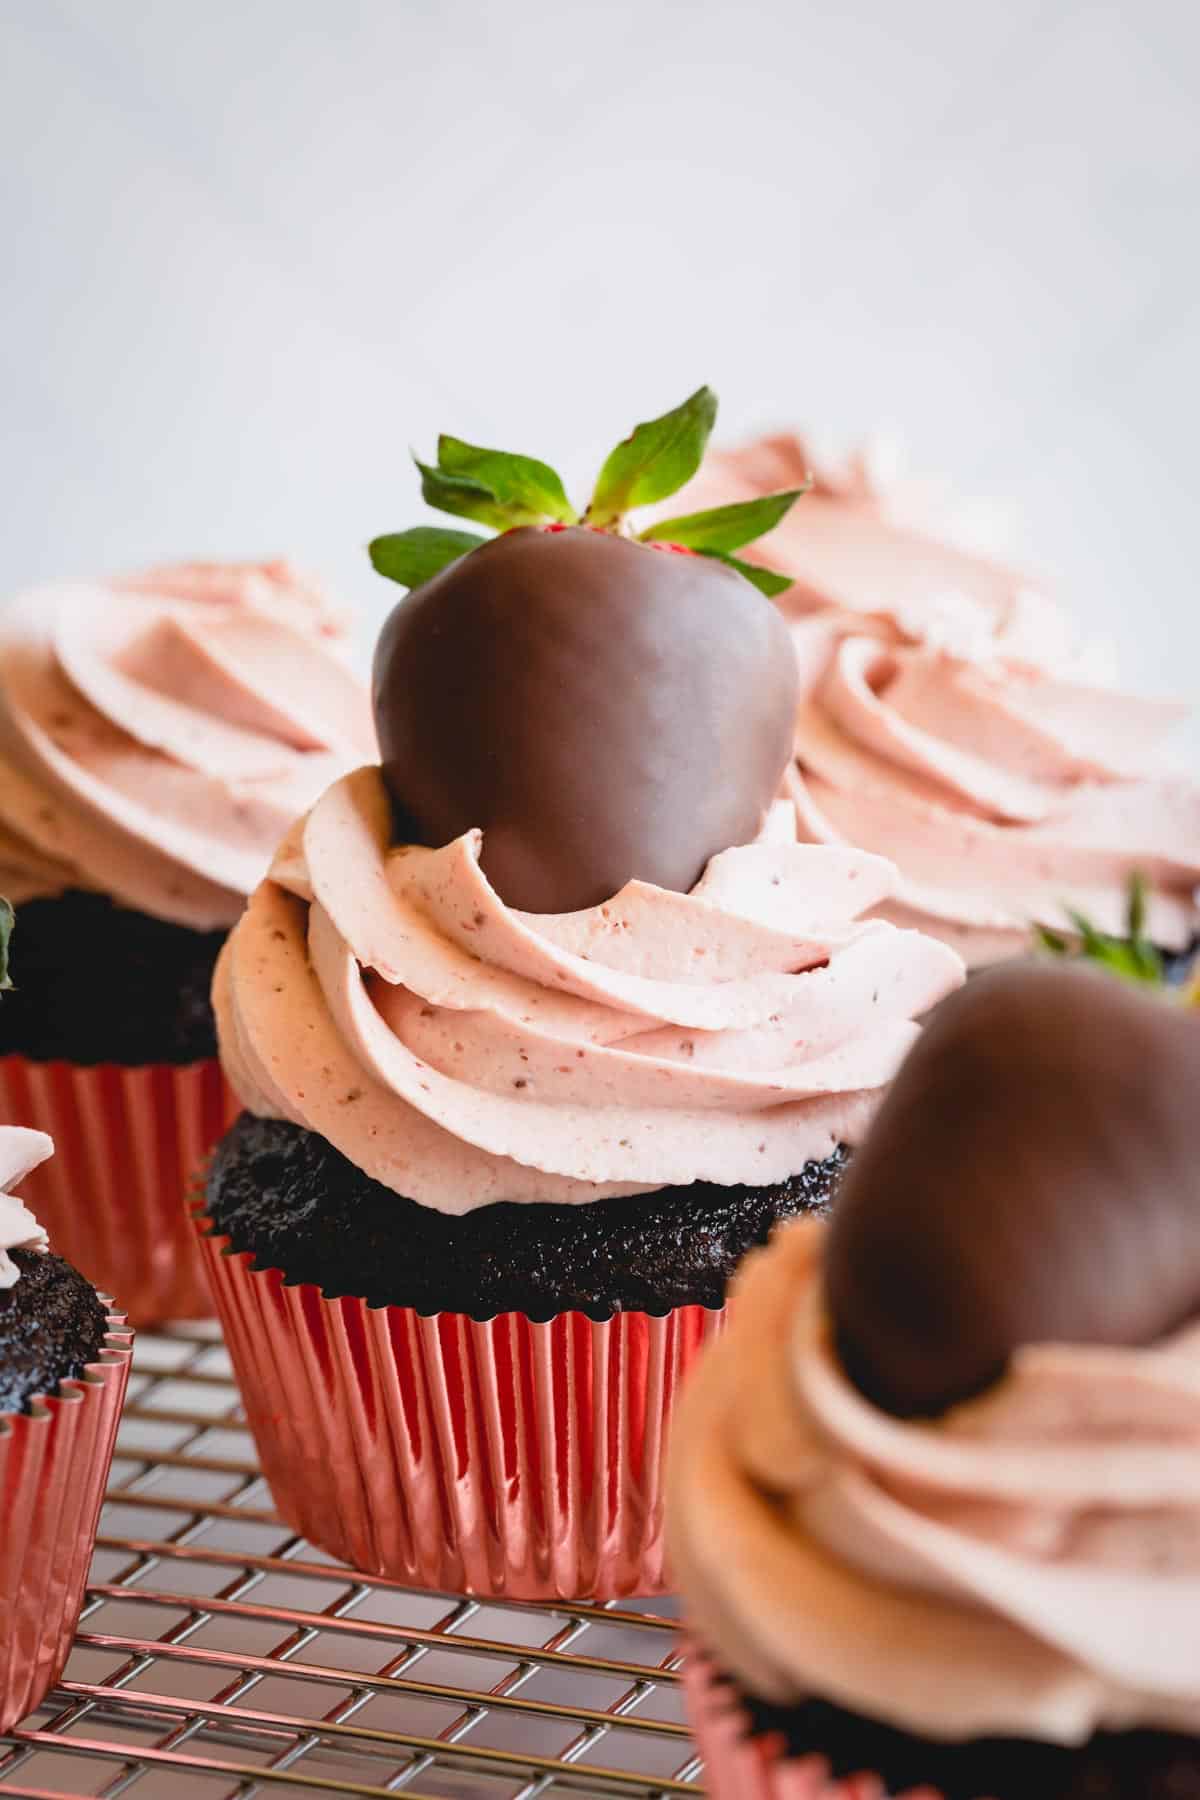 Side view of strawberry chocolate cupcakes topped with chocolate covered strawberries on a wire rack.